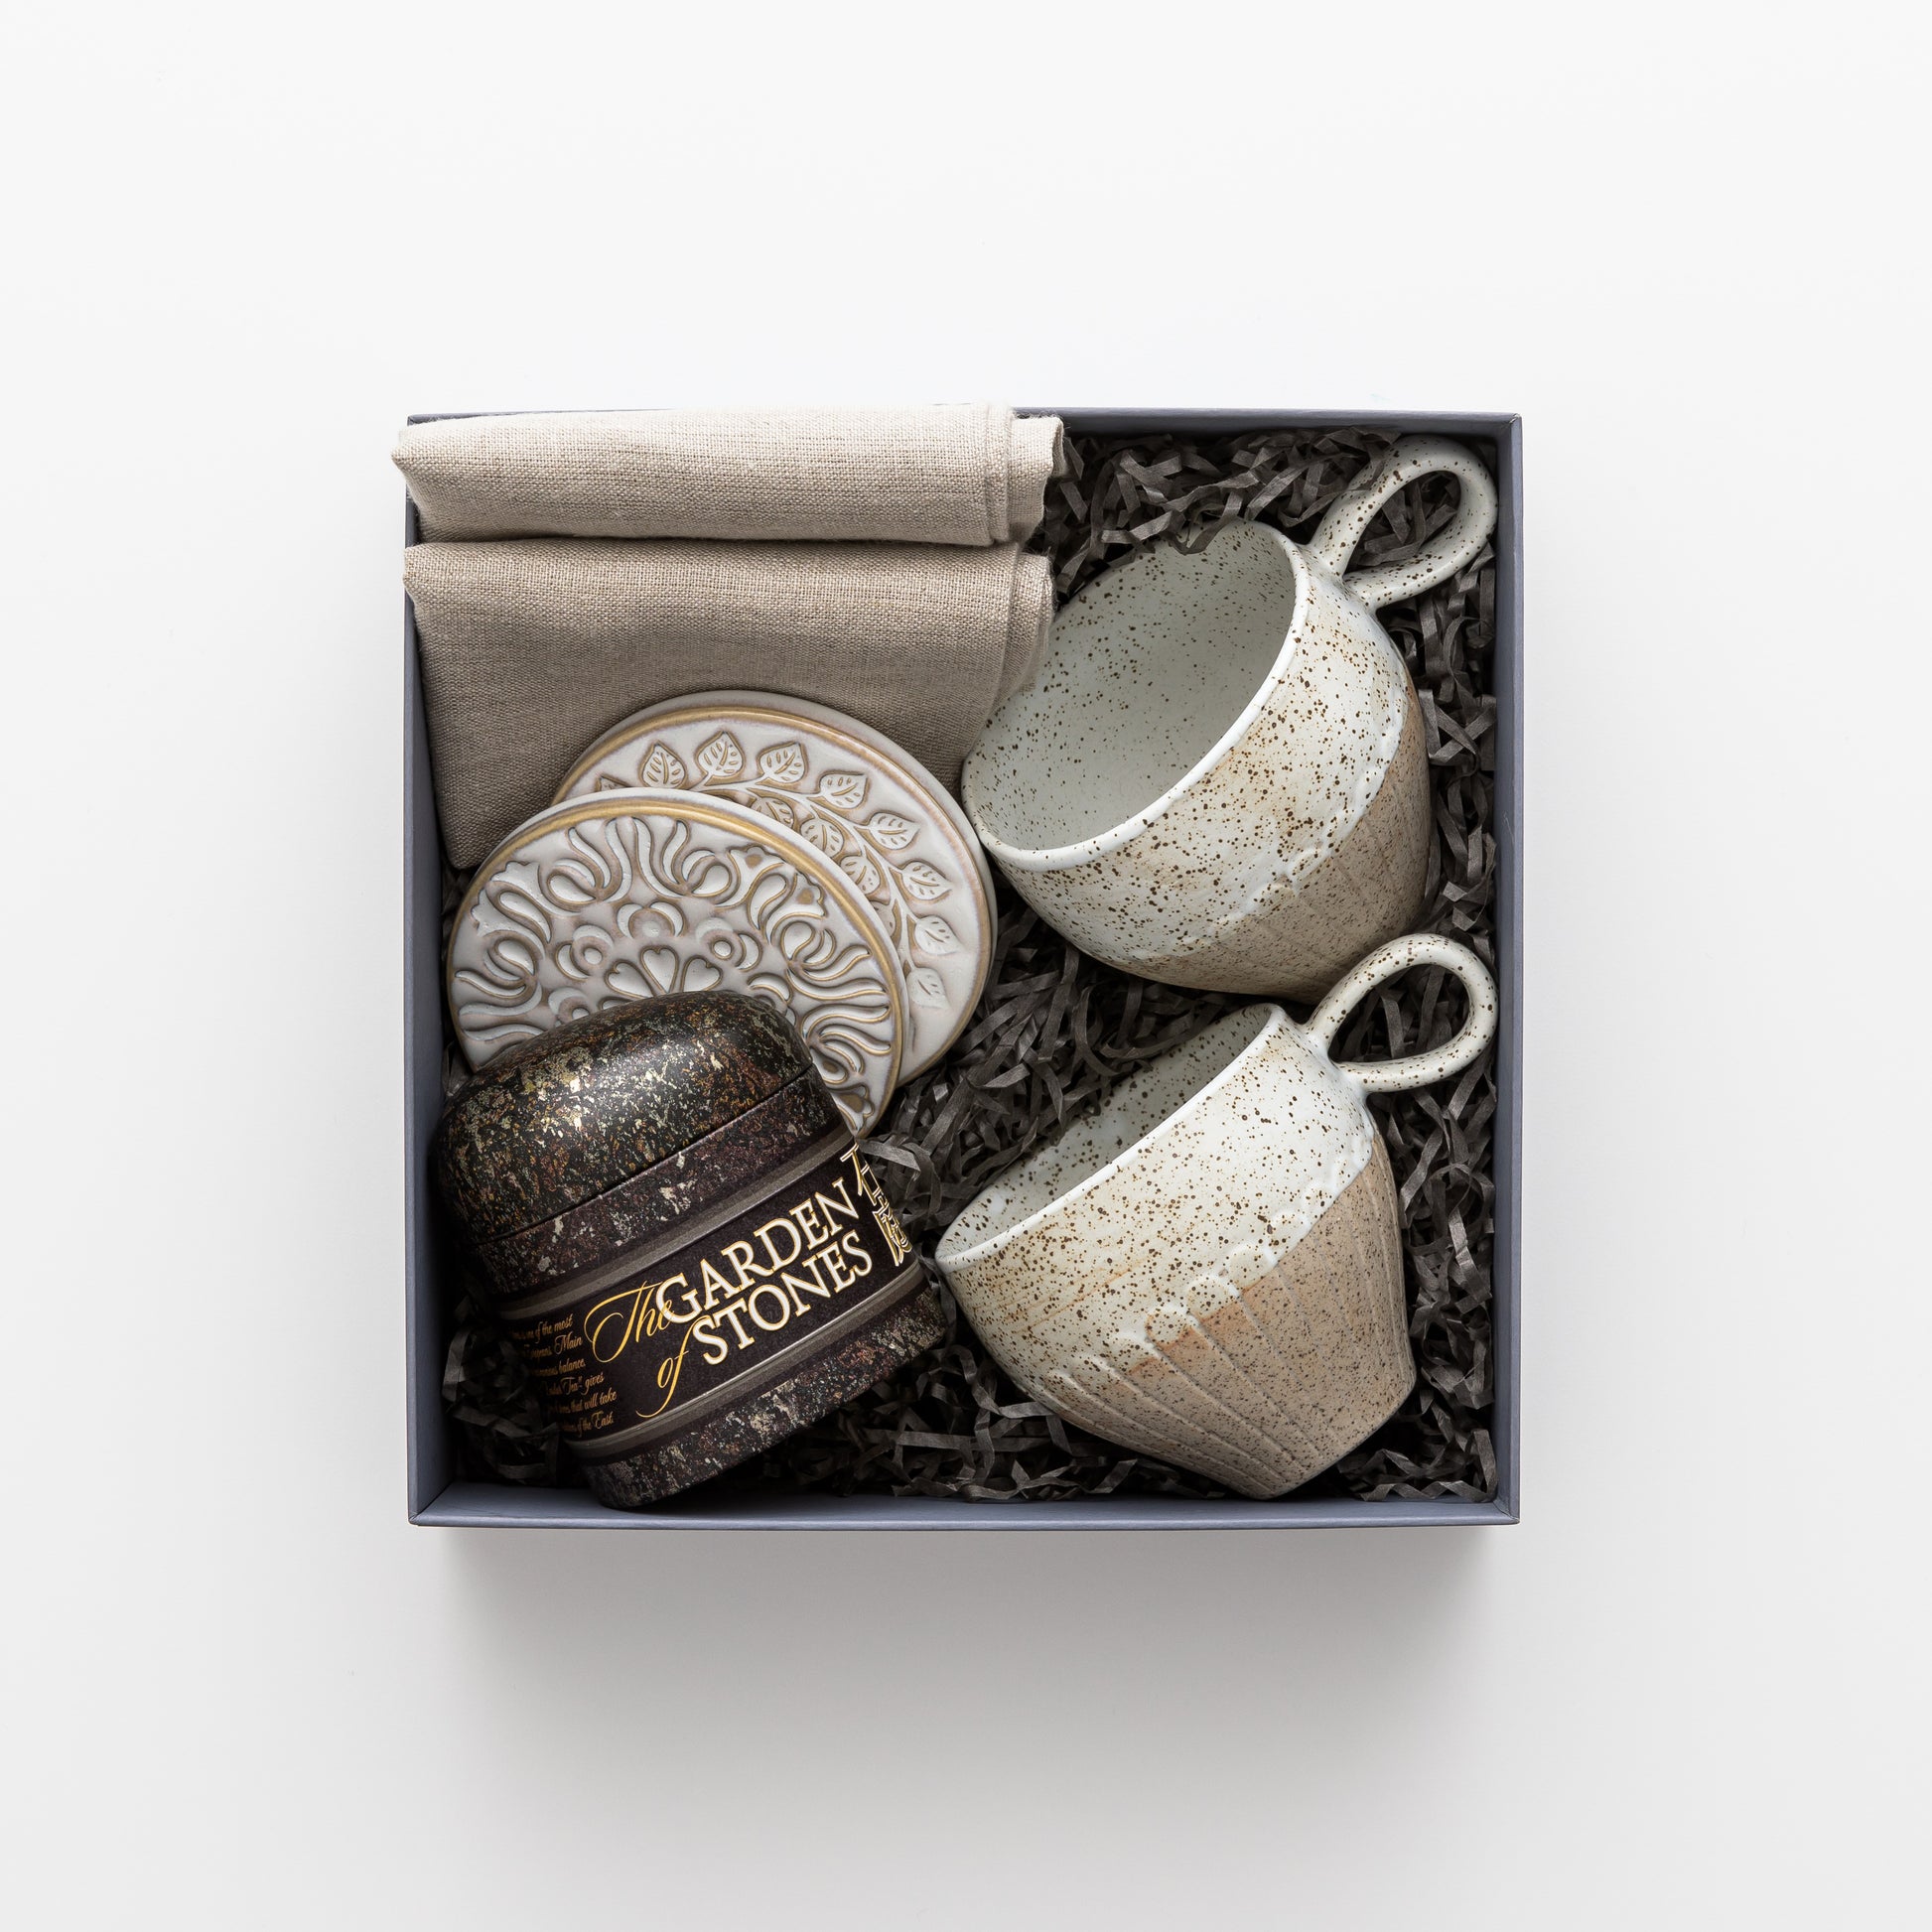 Gift box features two linen napkins, two ceramic mugs, tea, coasters.